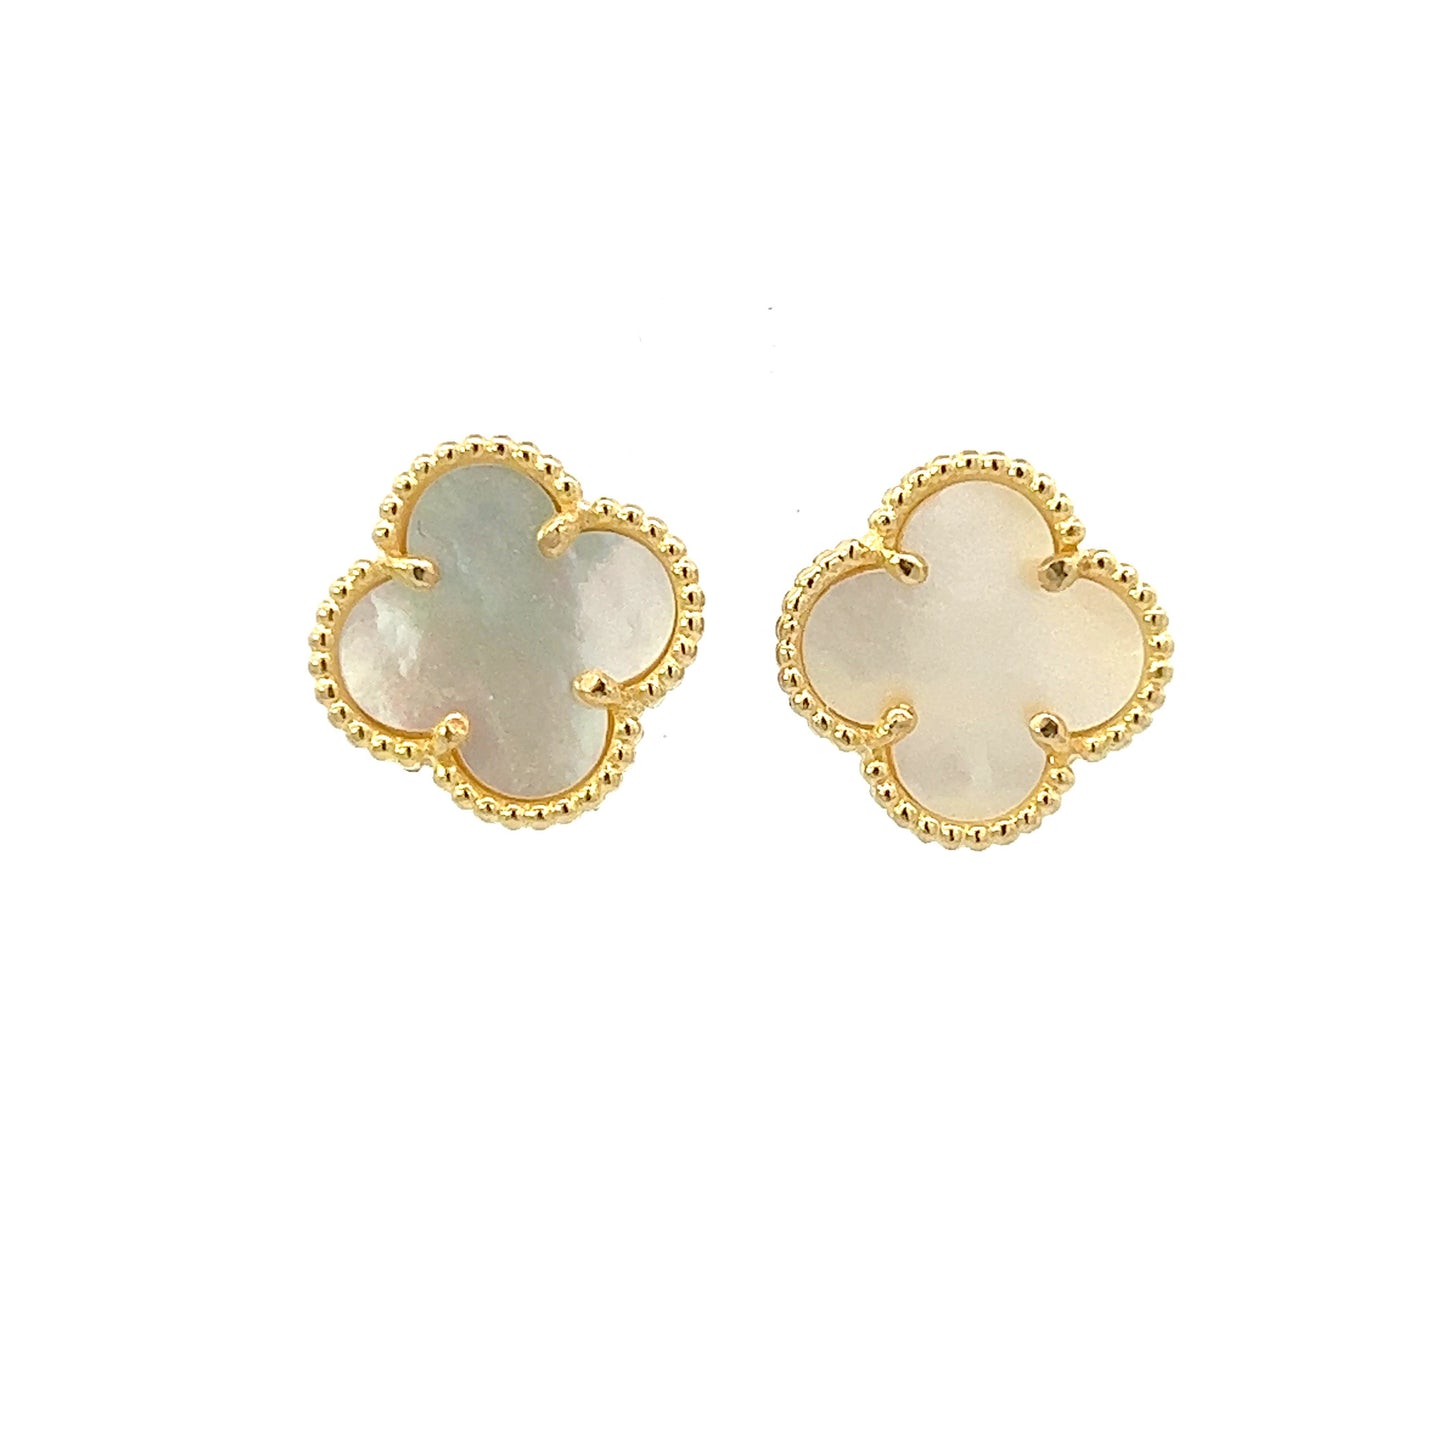 Earrings with Mother of Pearl